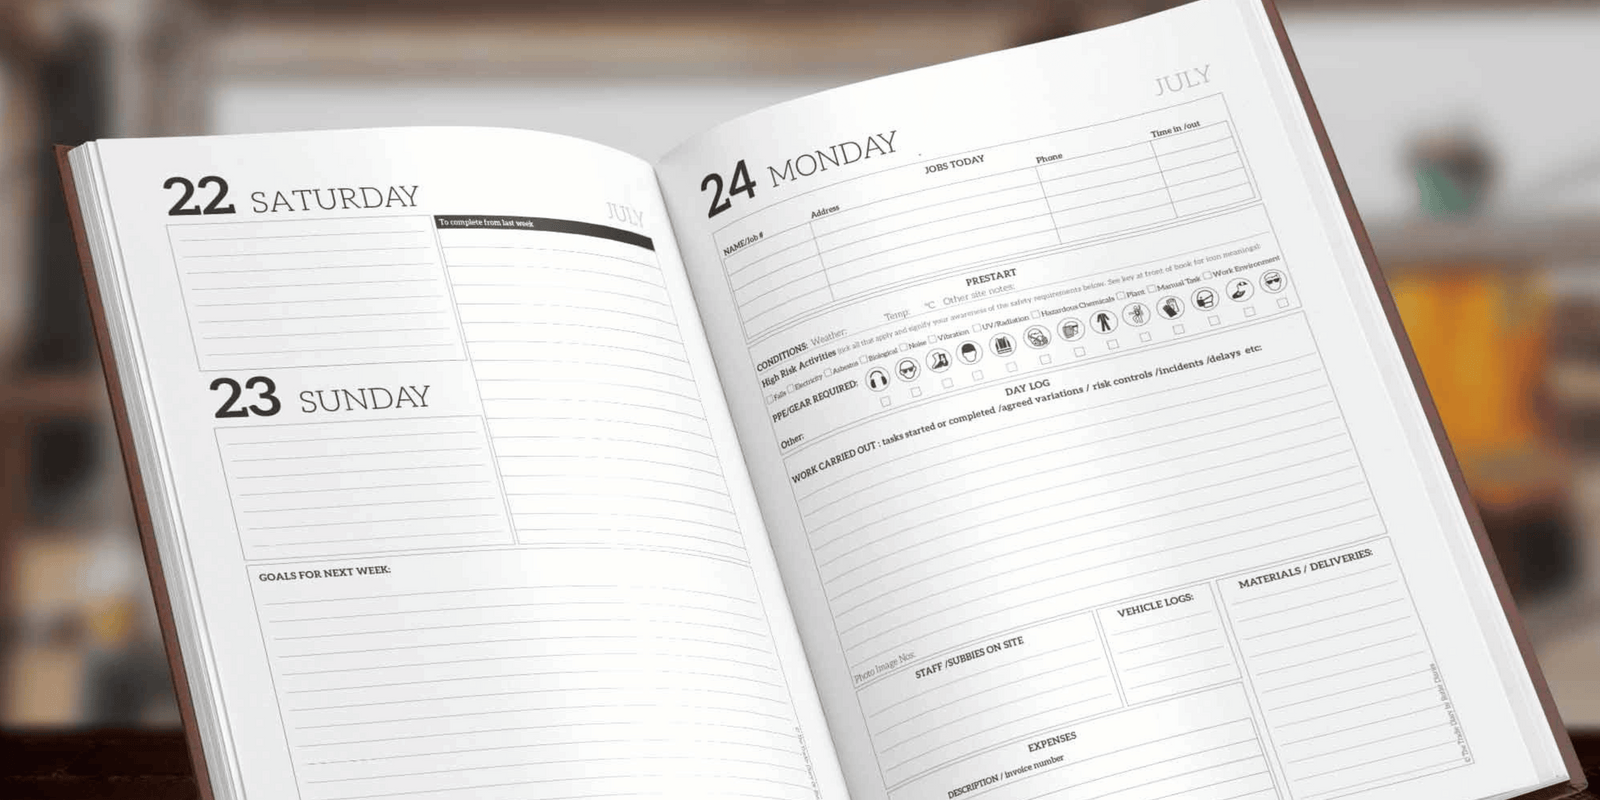 10 Reasons to use a Diary for your Trade Business